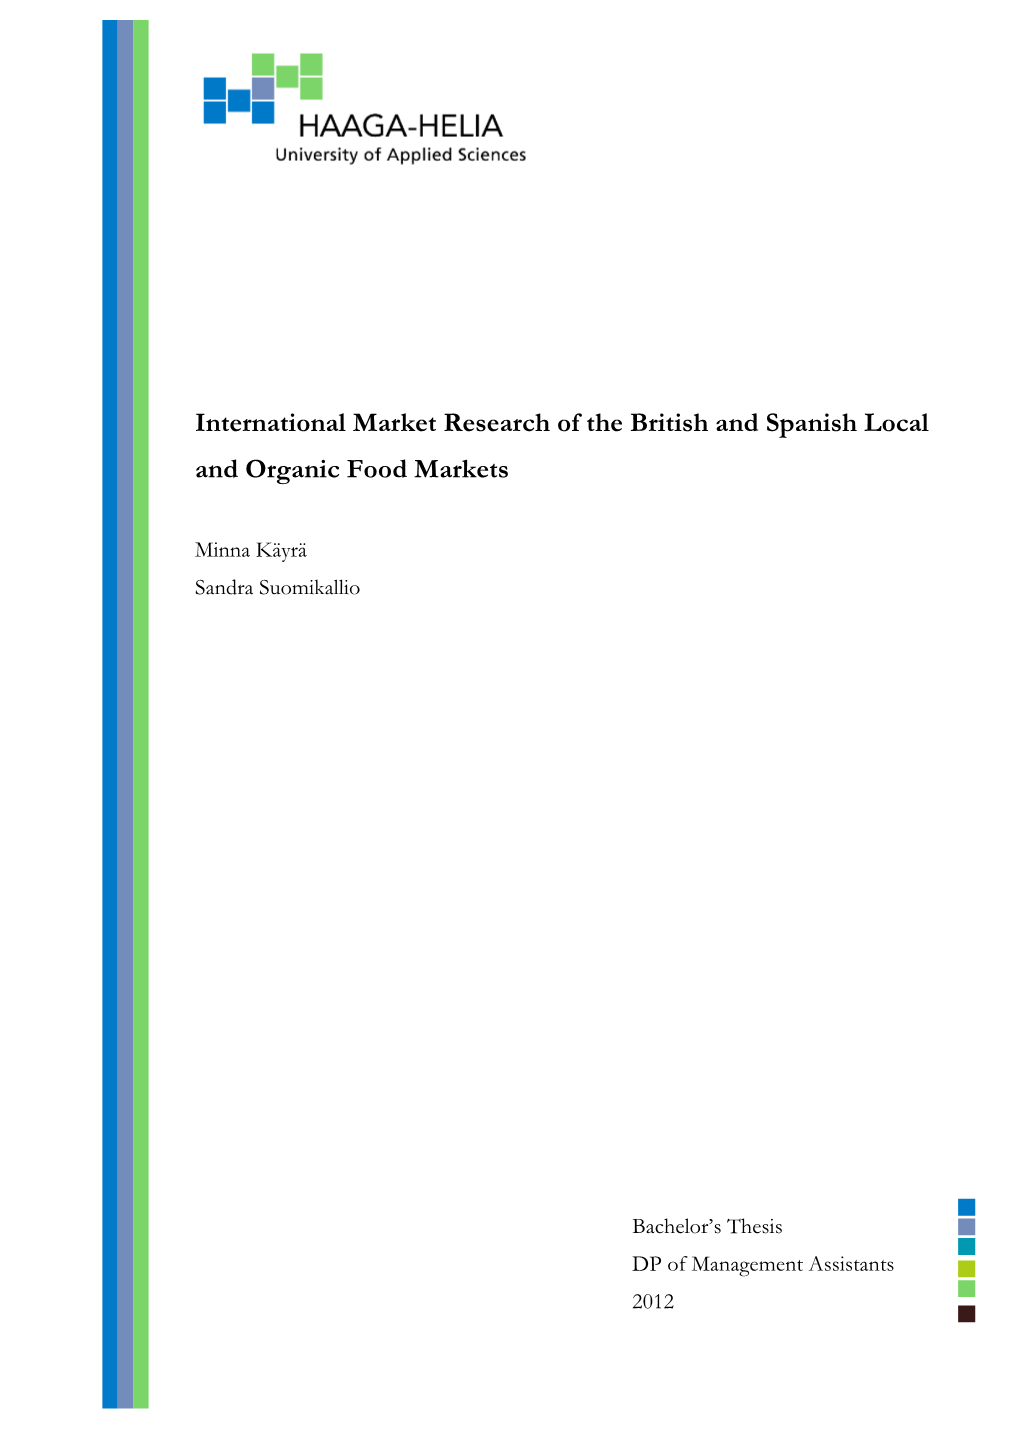 International Market Research of the British and Spanish Local and Organic Food Markets